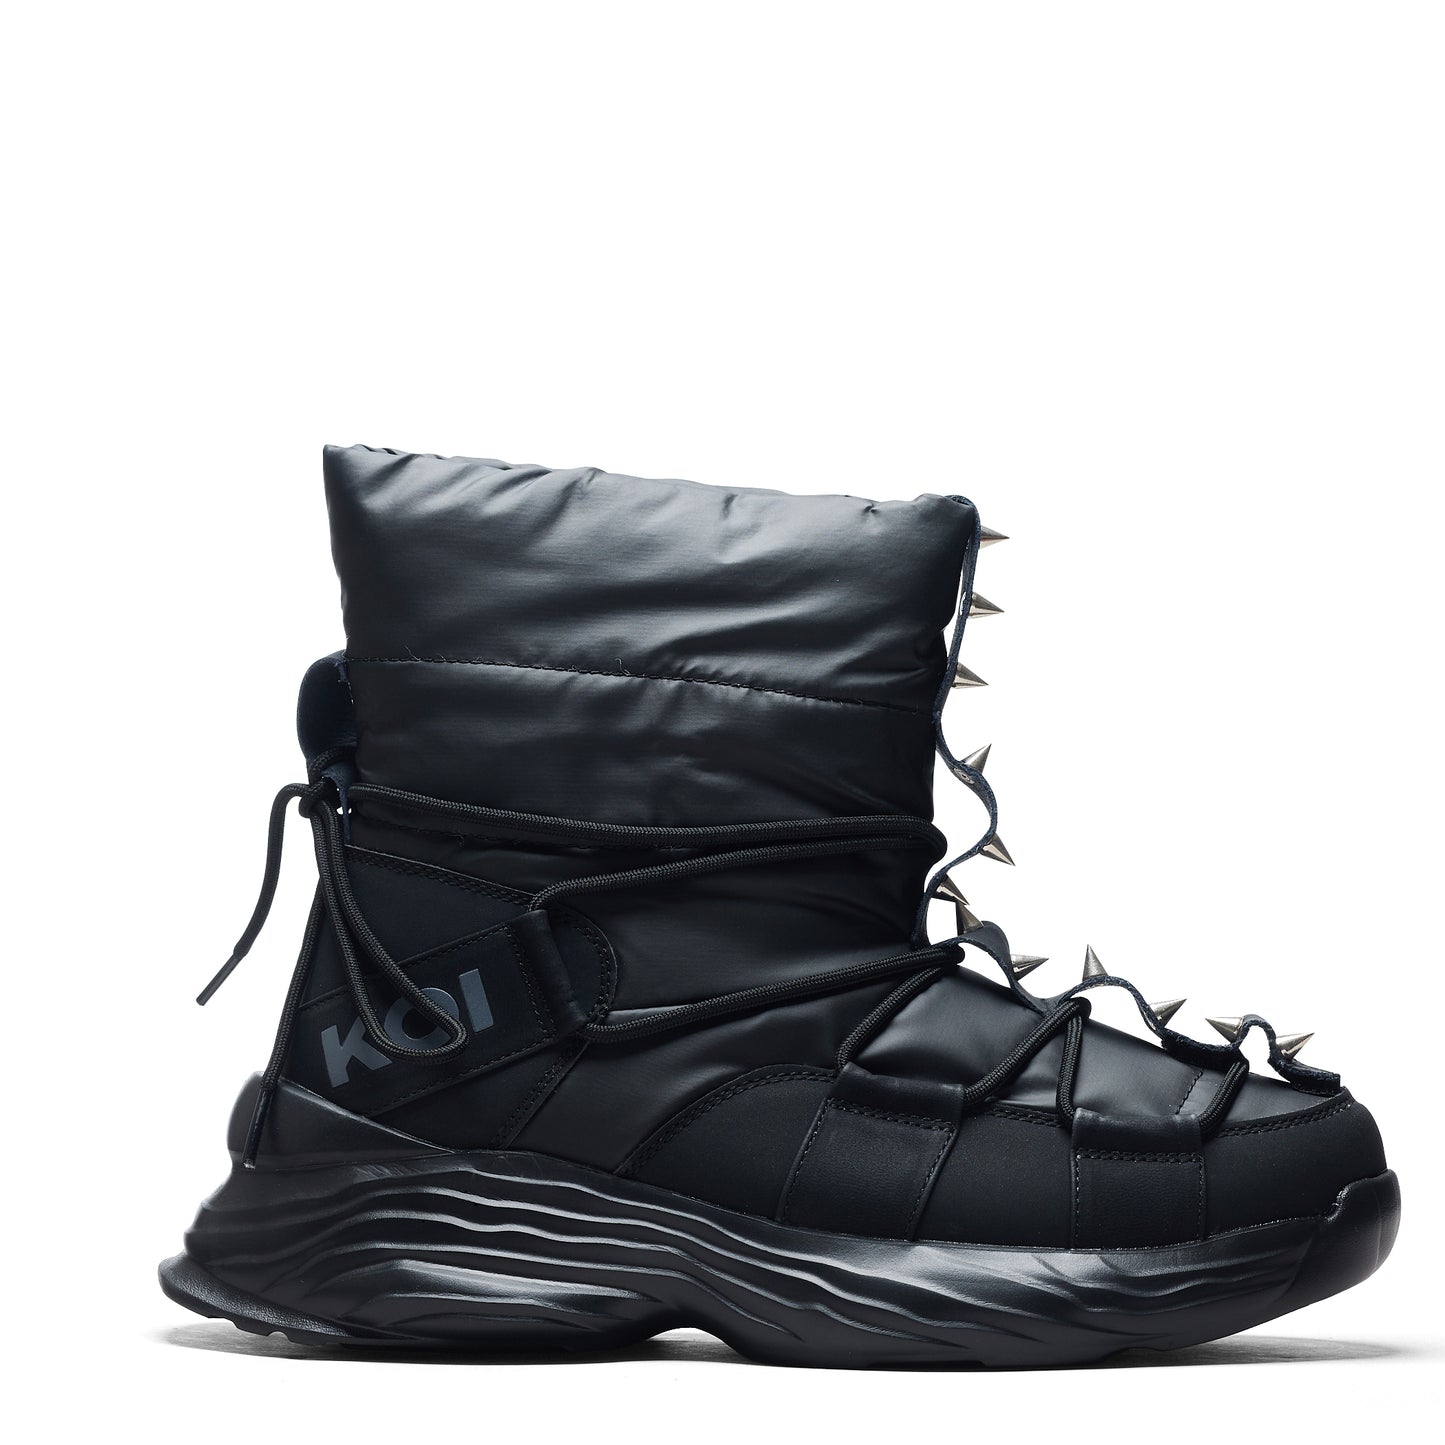 Cauldrife Demons Men's Spiked Snow Boots - Black - Ankle Boots - KOI Footwear - Black - Side View